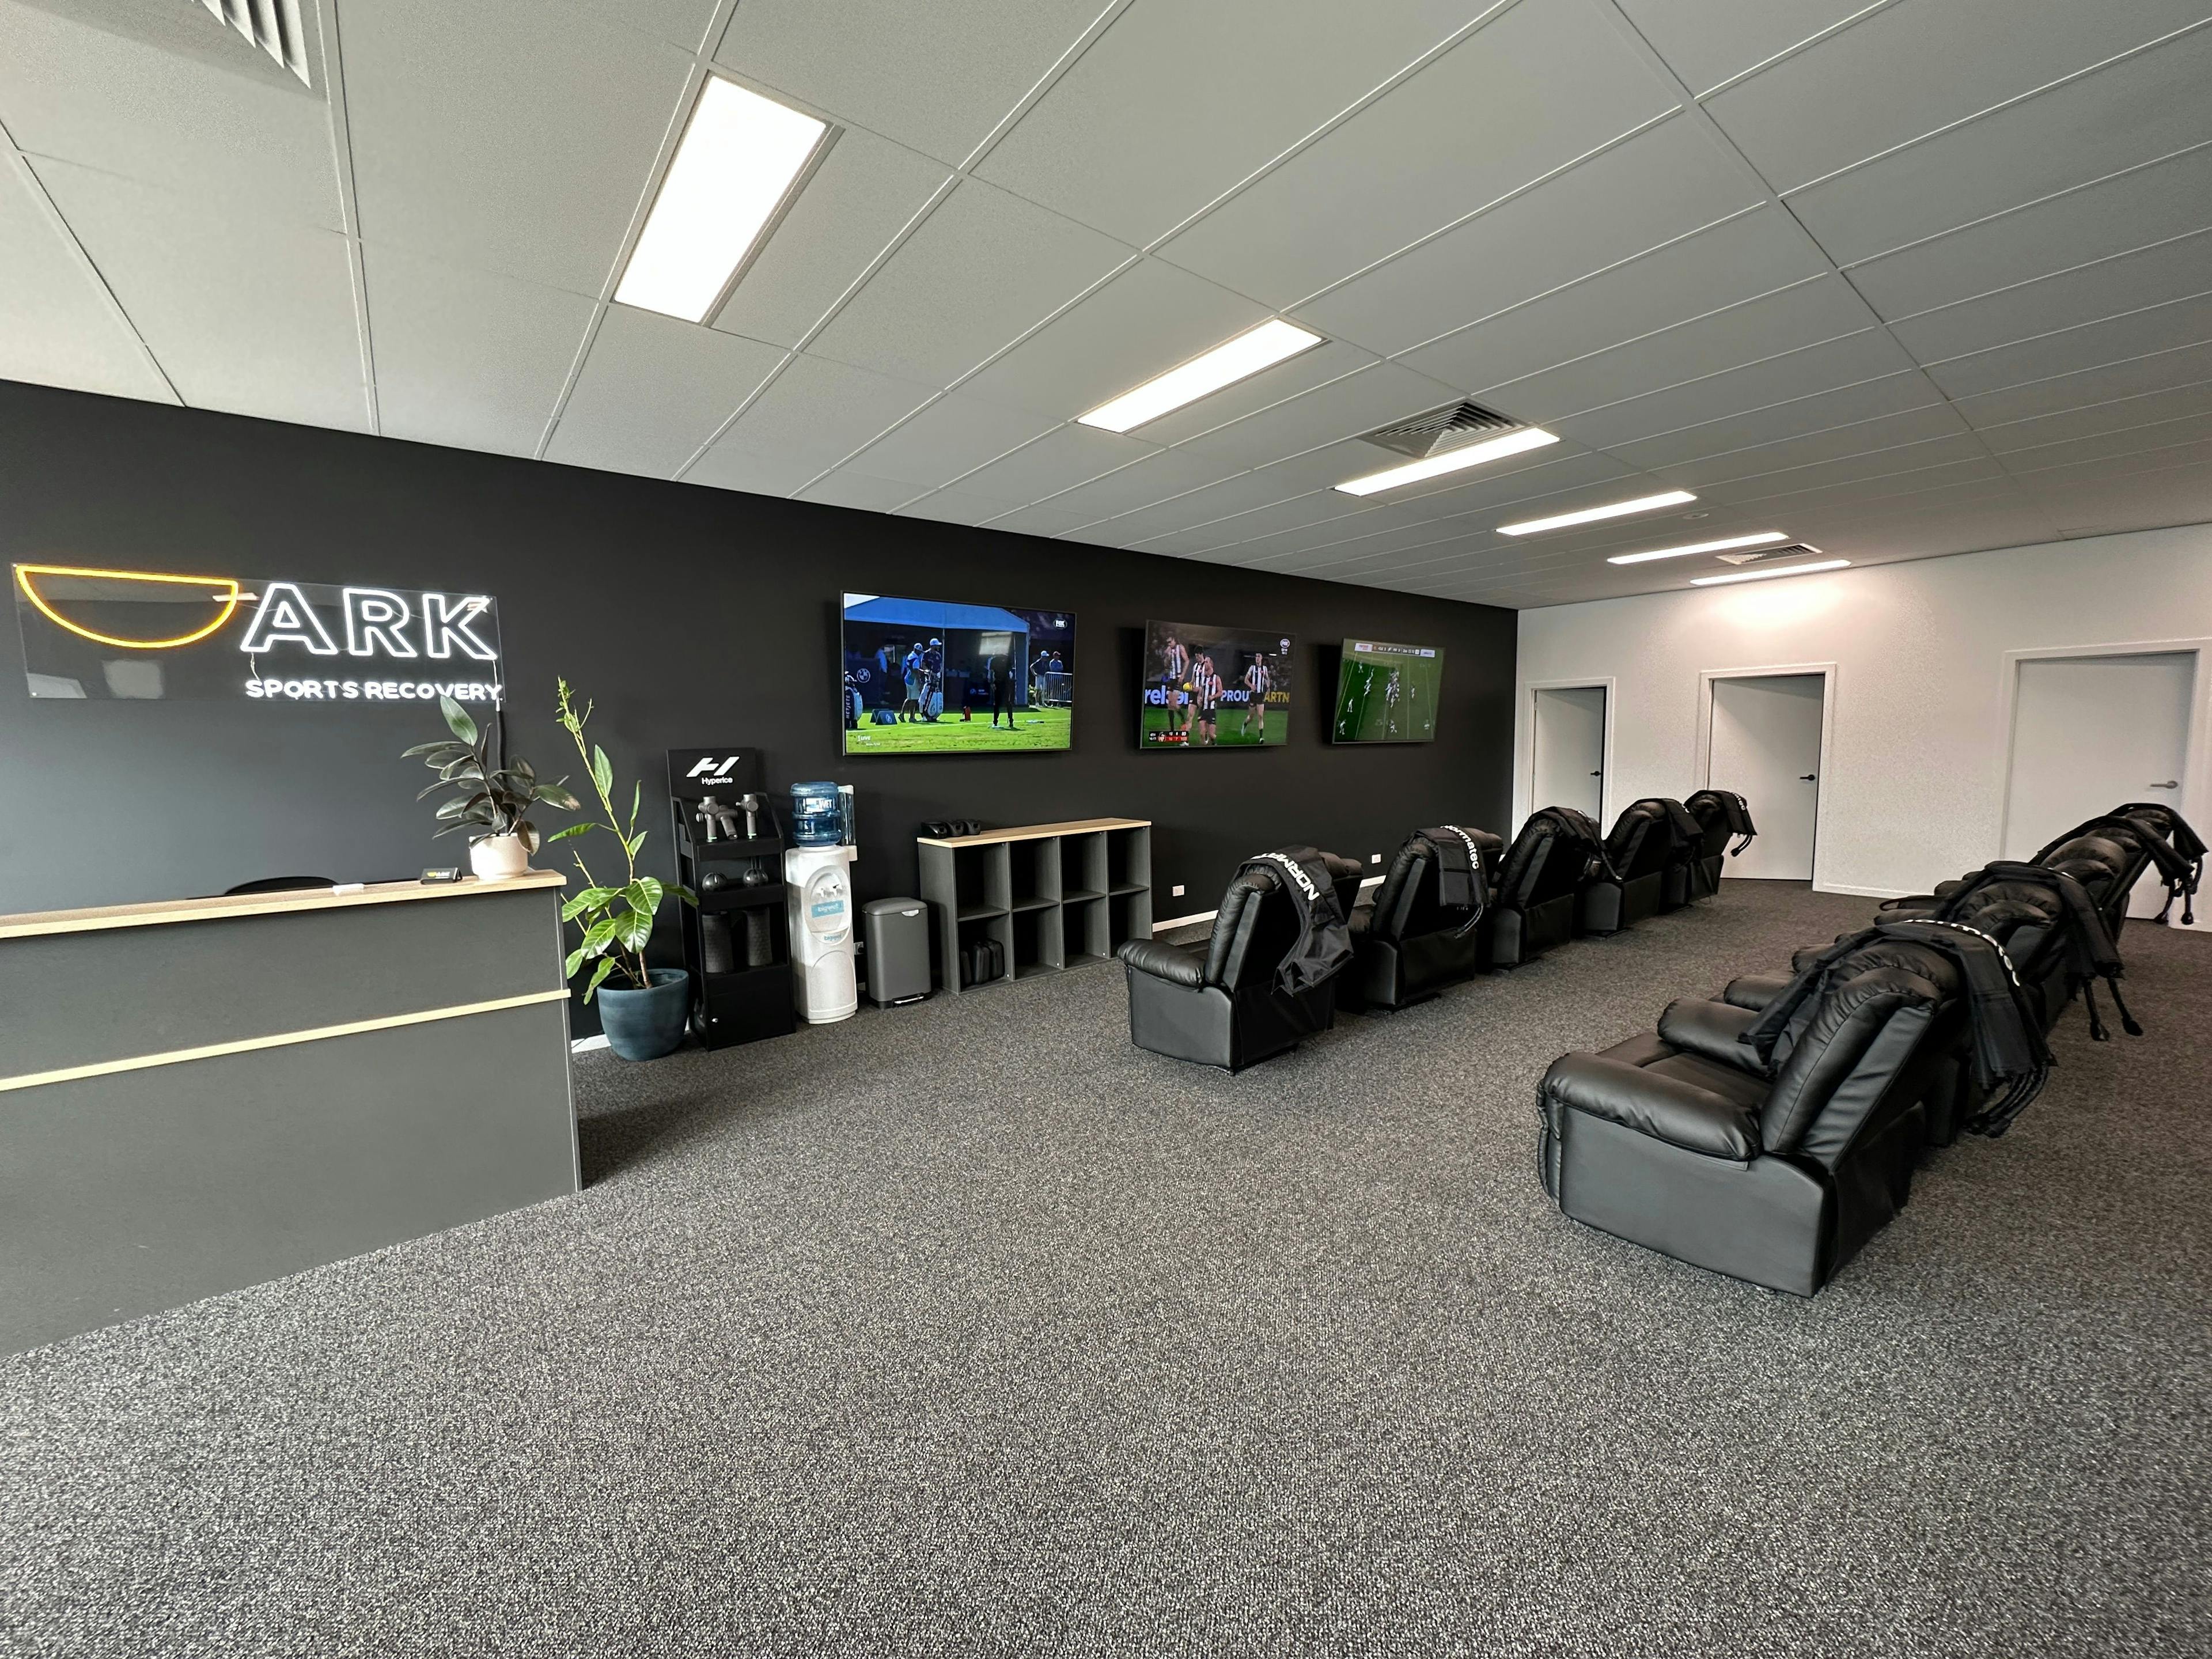 The Ark Sports Recovery lounge is a great place to relax while using the Normatec recovery boots